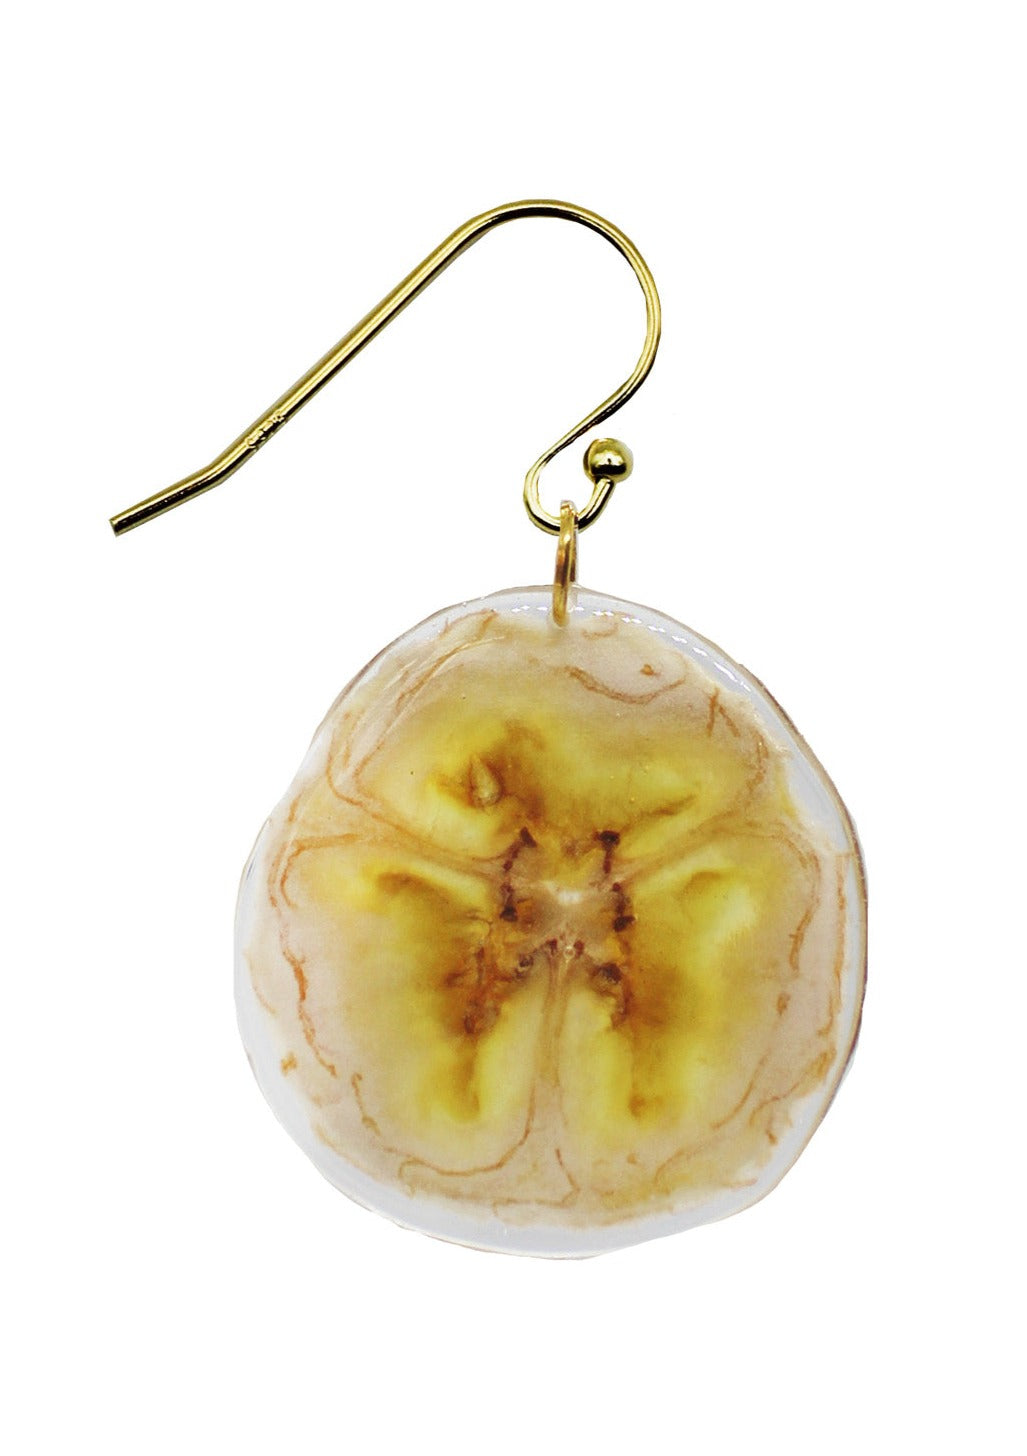 Resin Coated Slice of Banana on a French Hook Earring